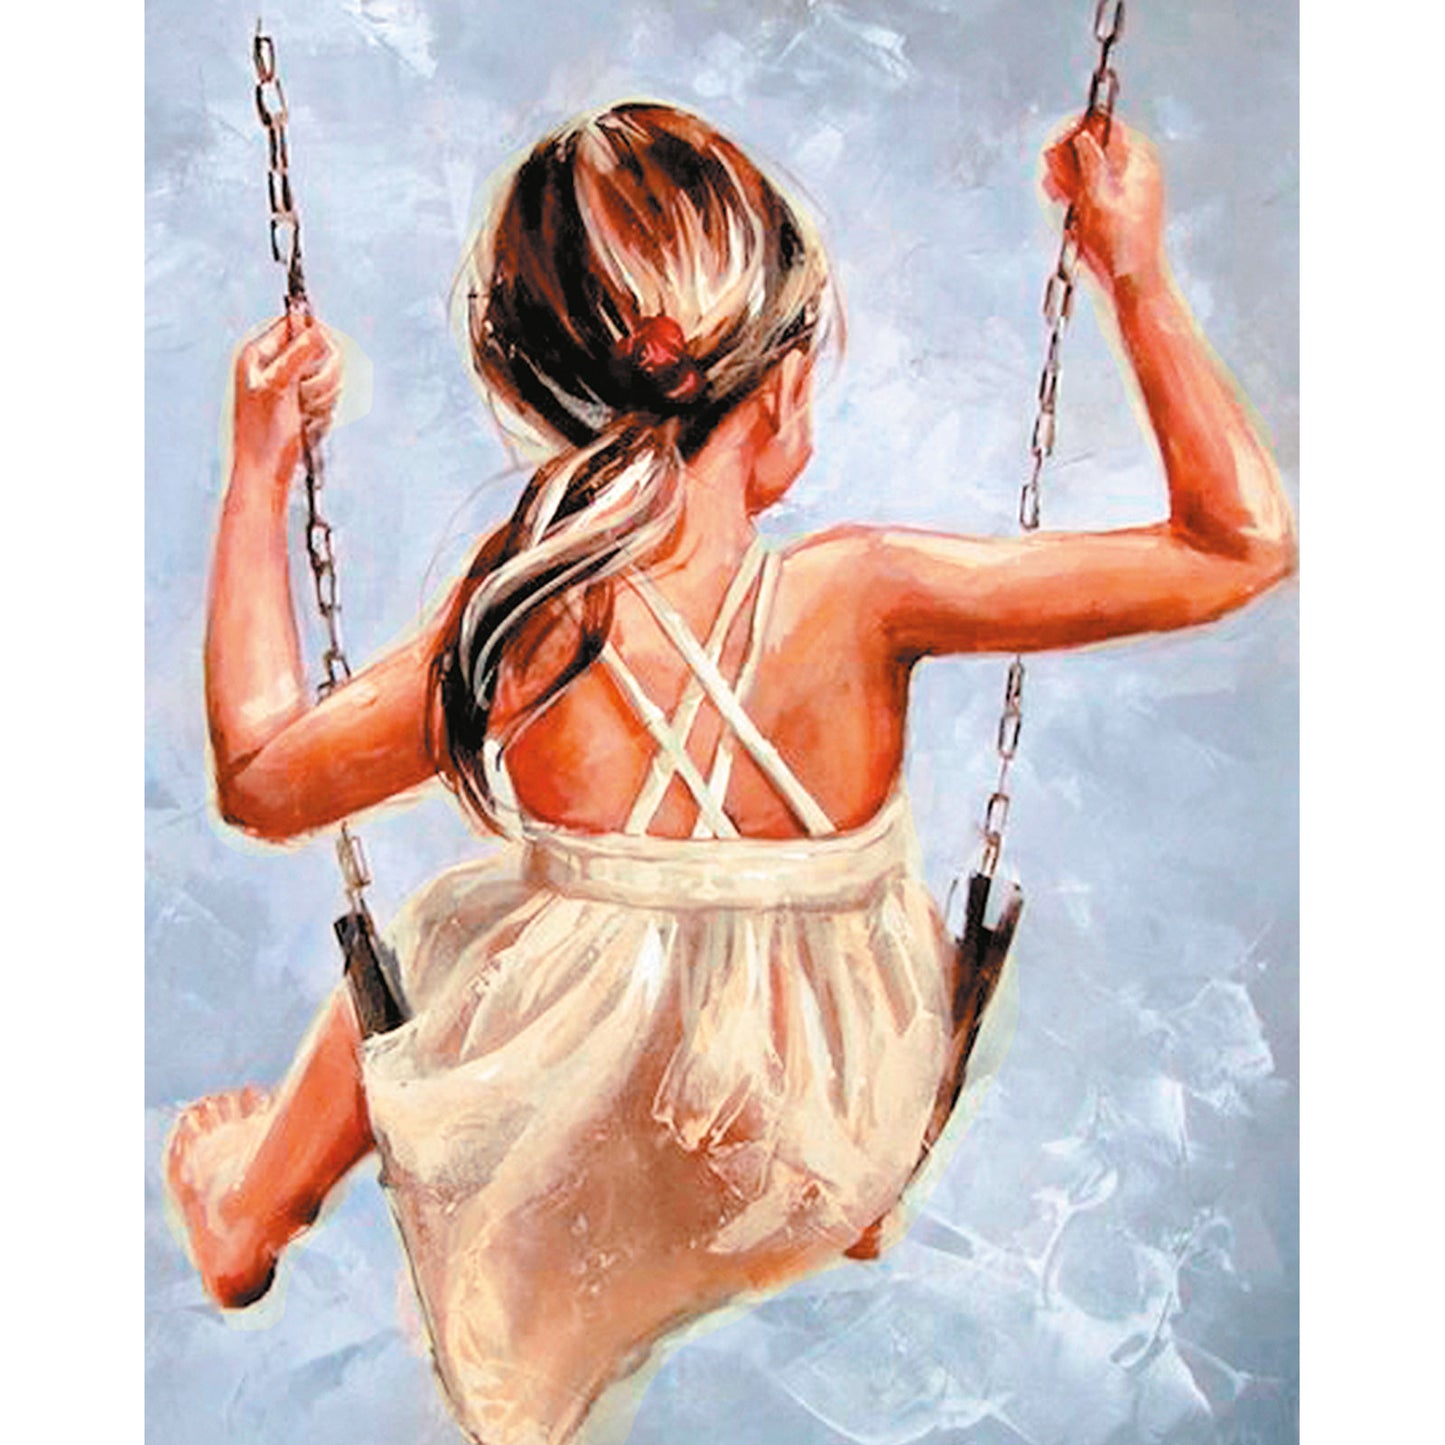 Painting by numbers - MG2106e - Happiness on the Swing Image 3